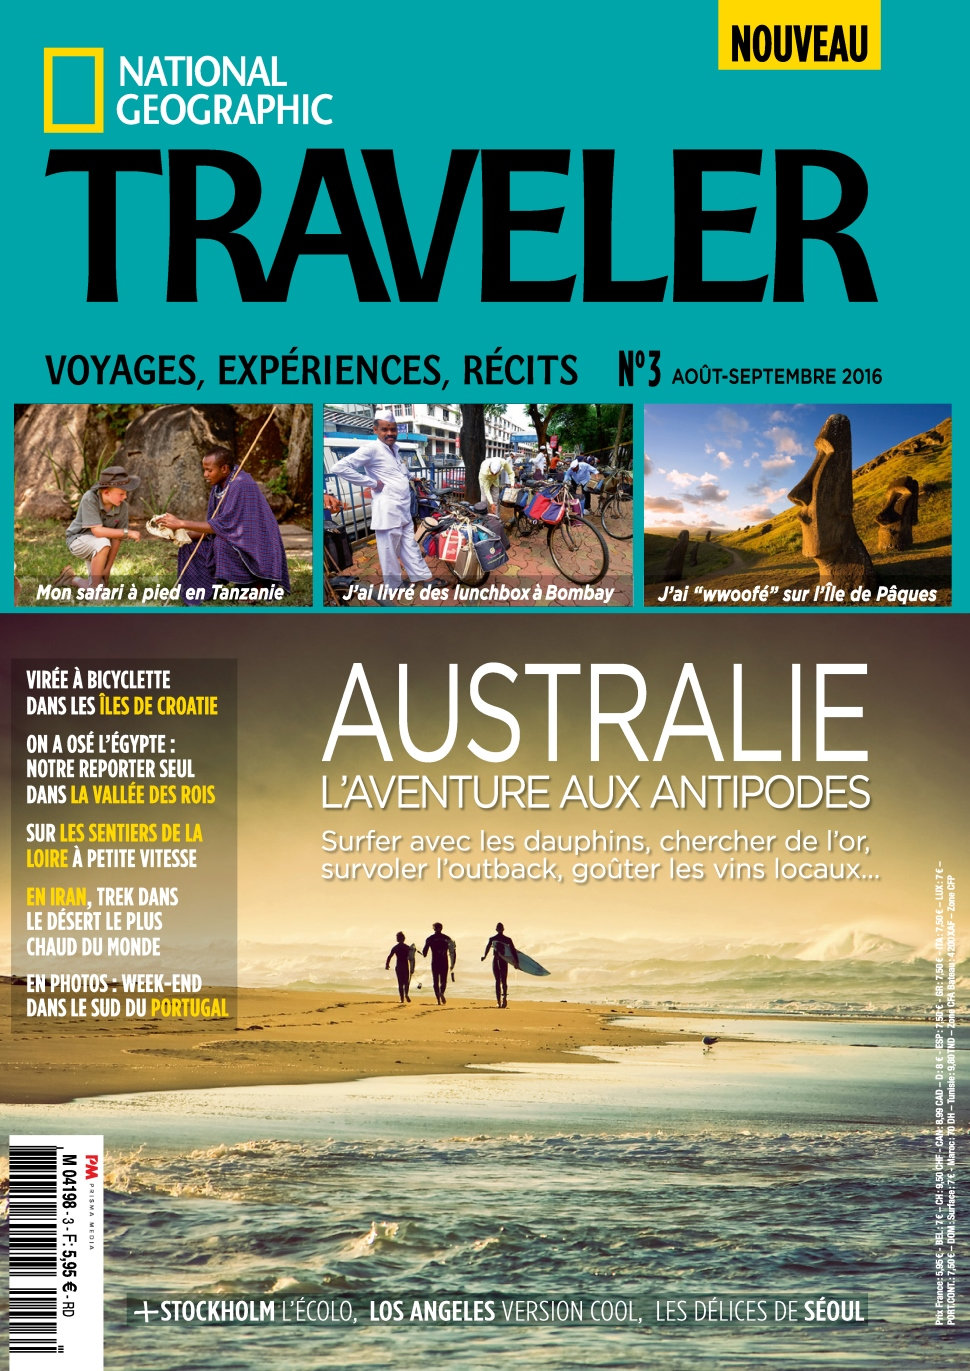 National Geographic Traveler N°3 - Aout/Septembre 2016 